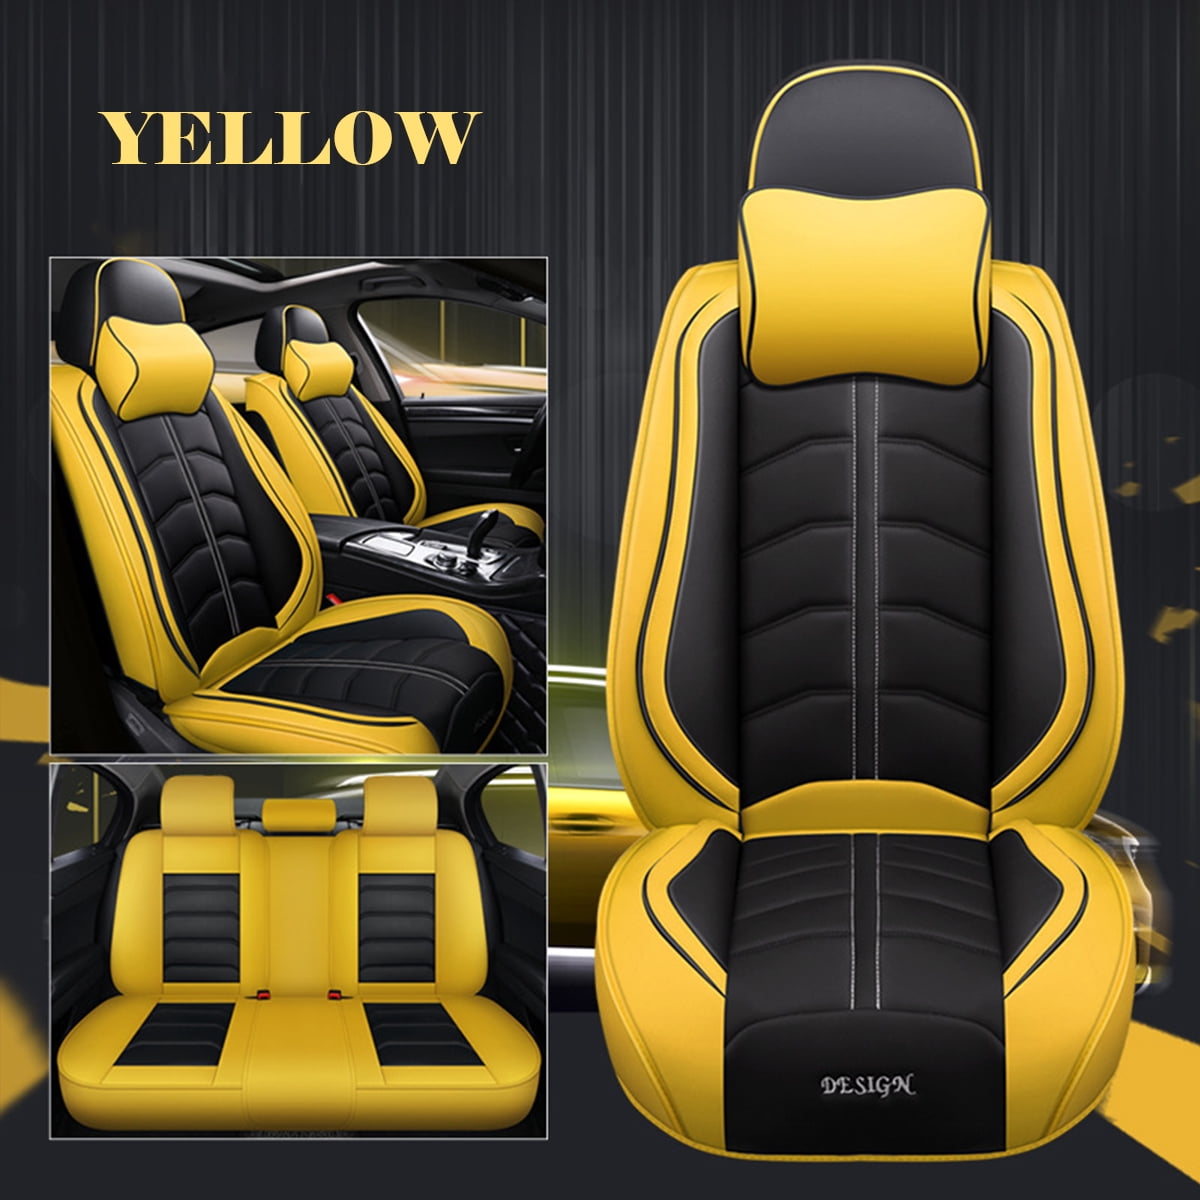 PRODUCT DESCRIPTION Universal Fit Seat Protectors For SUV and Car Bucket Seats